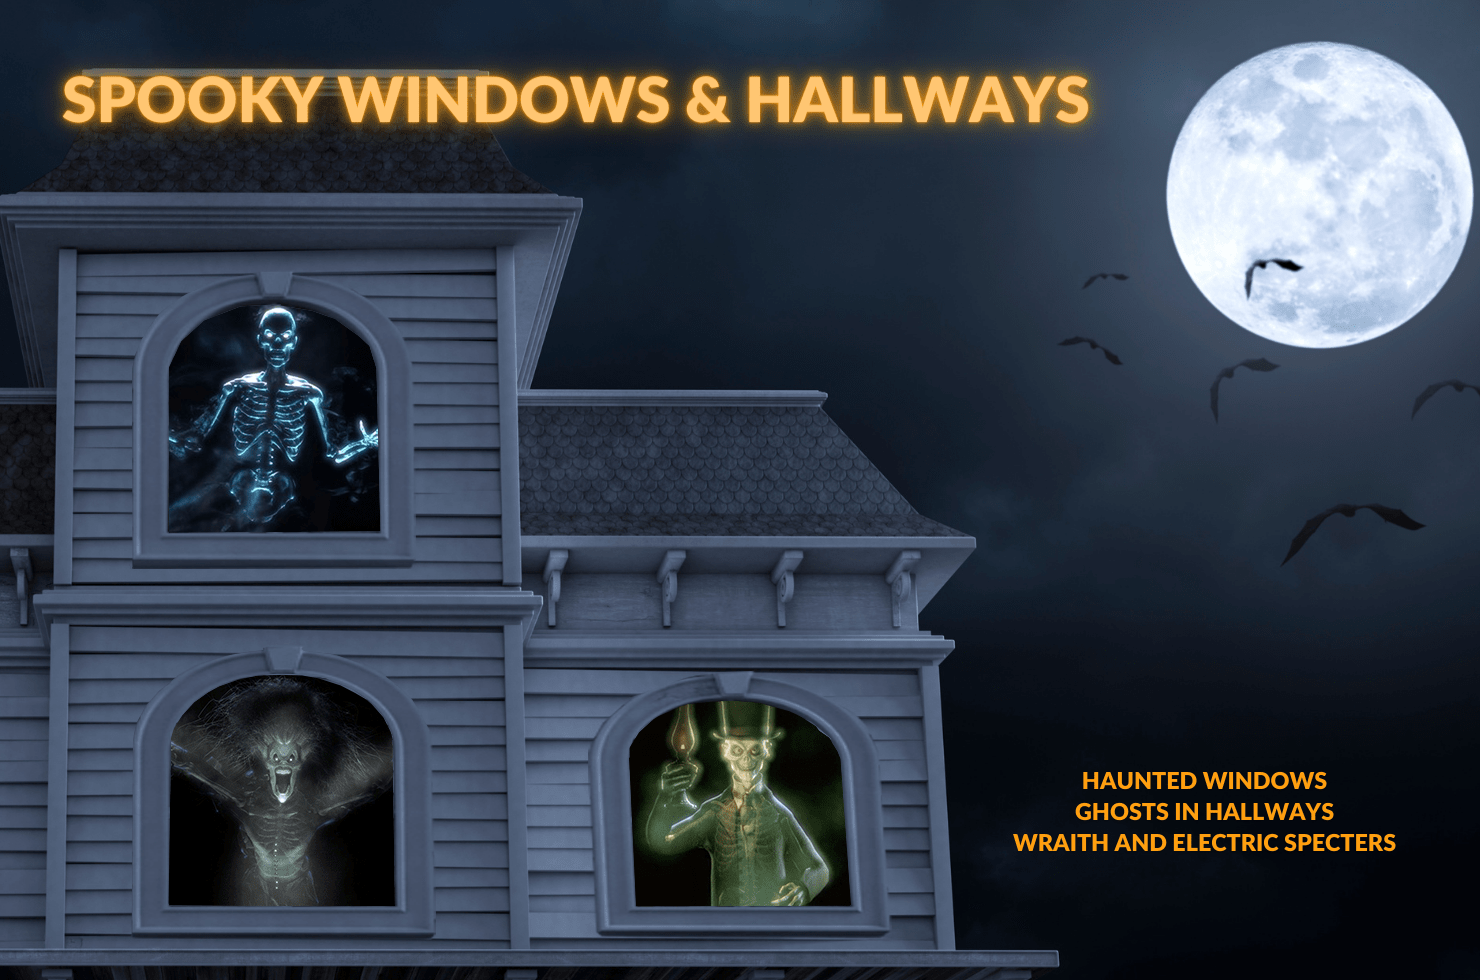 Image of a haunted house with Ghosts, Specters in the window, setup anywhere.